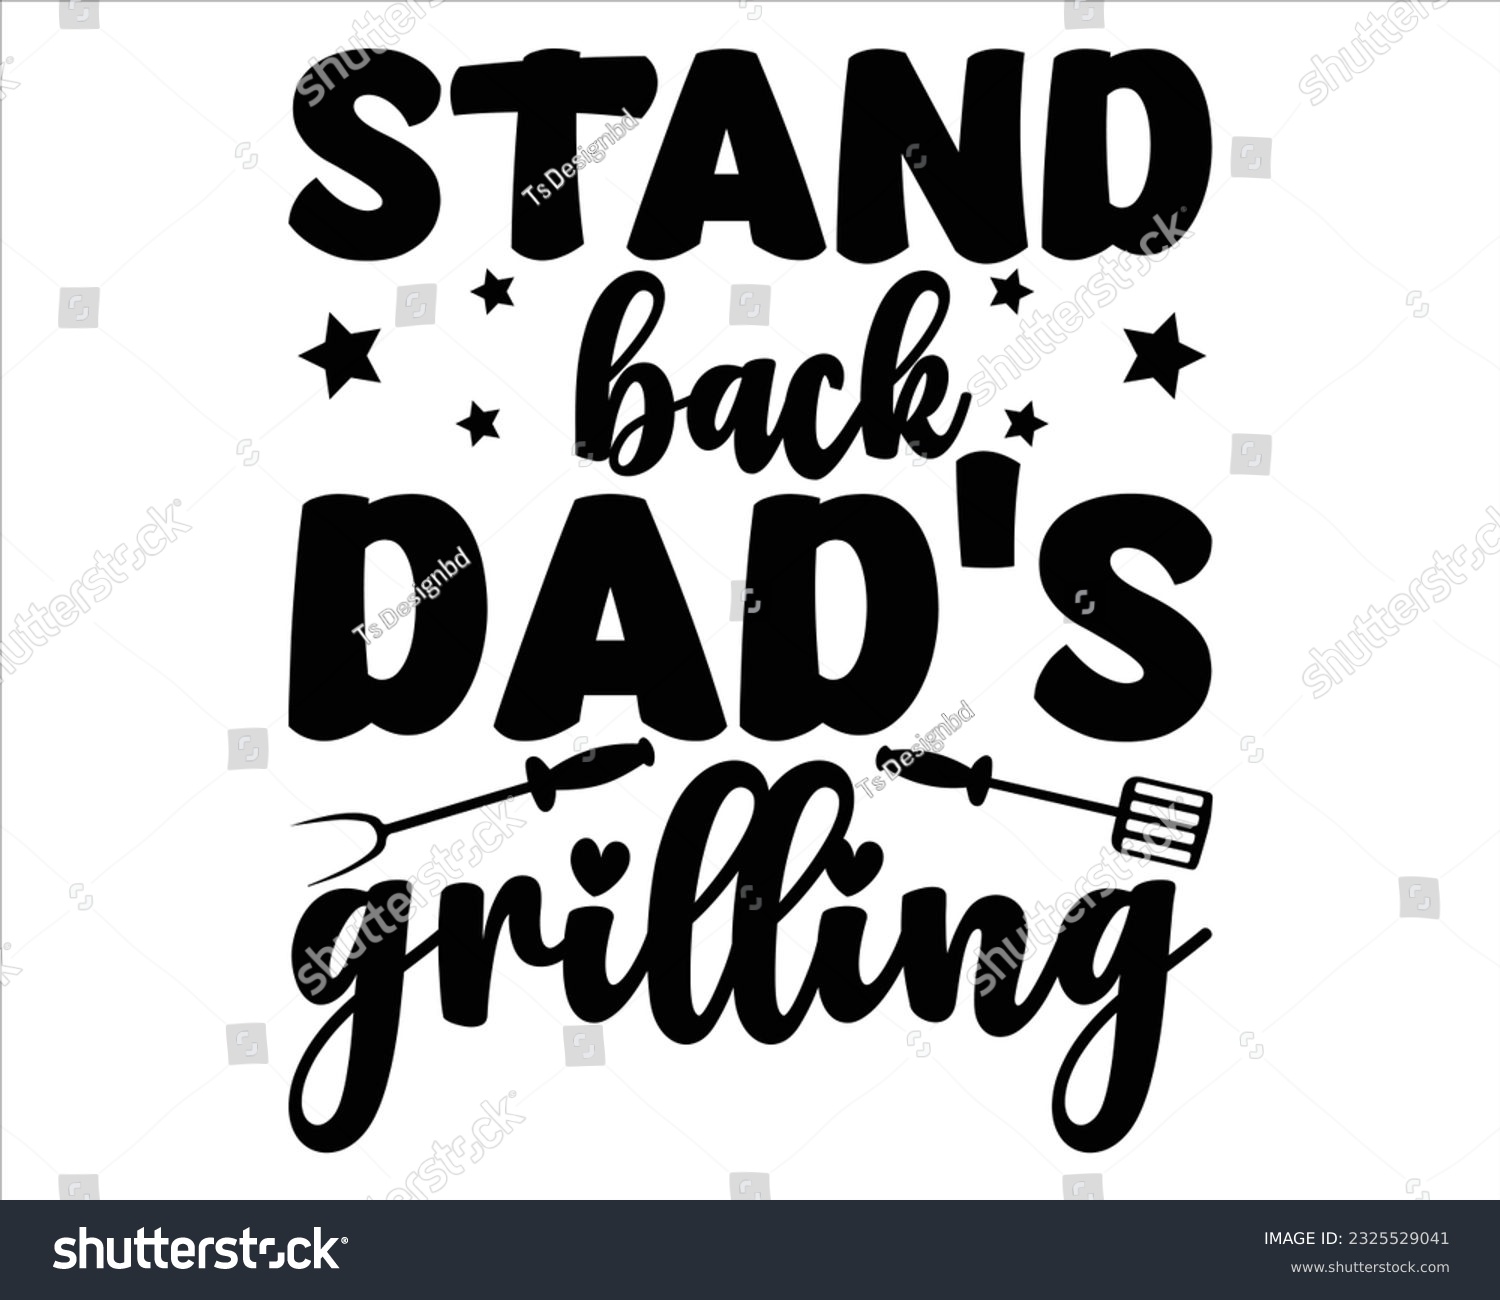 SVG of Stand Back Dad's Grilling  Svg Design,Barbecue svg,BBQ SVG design and craft files,Barbeque party. Father's Day decor. BBQ clipart,Bbq Design Svg Design svg